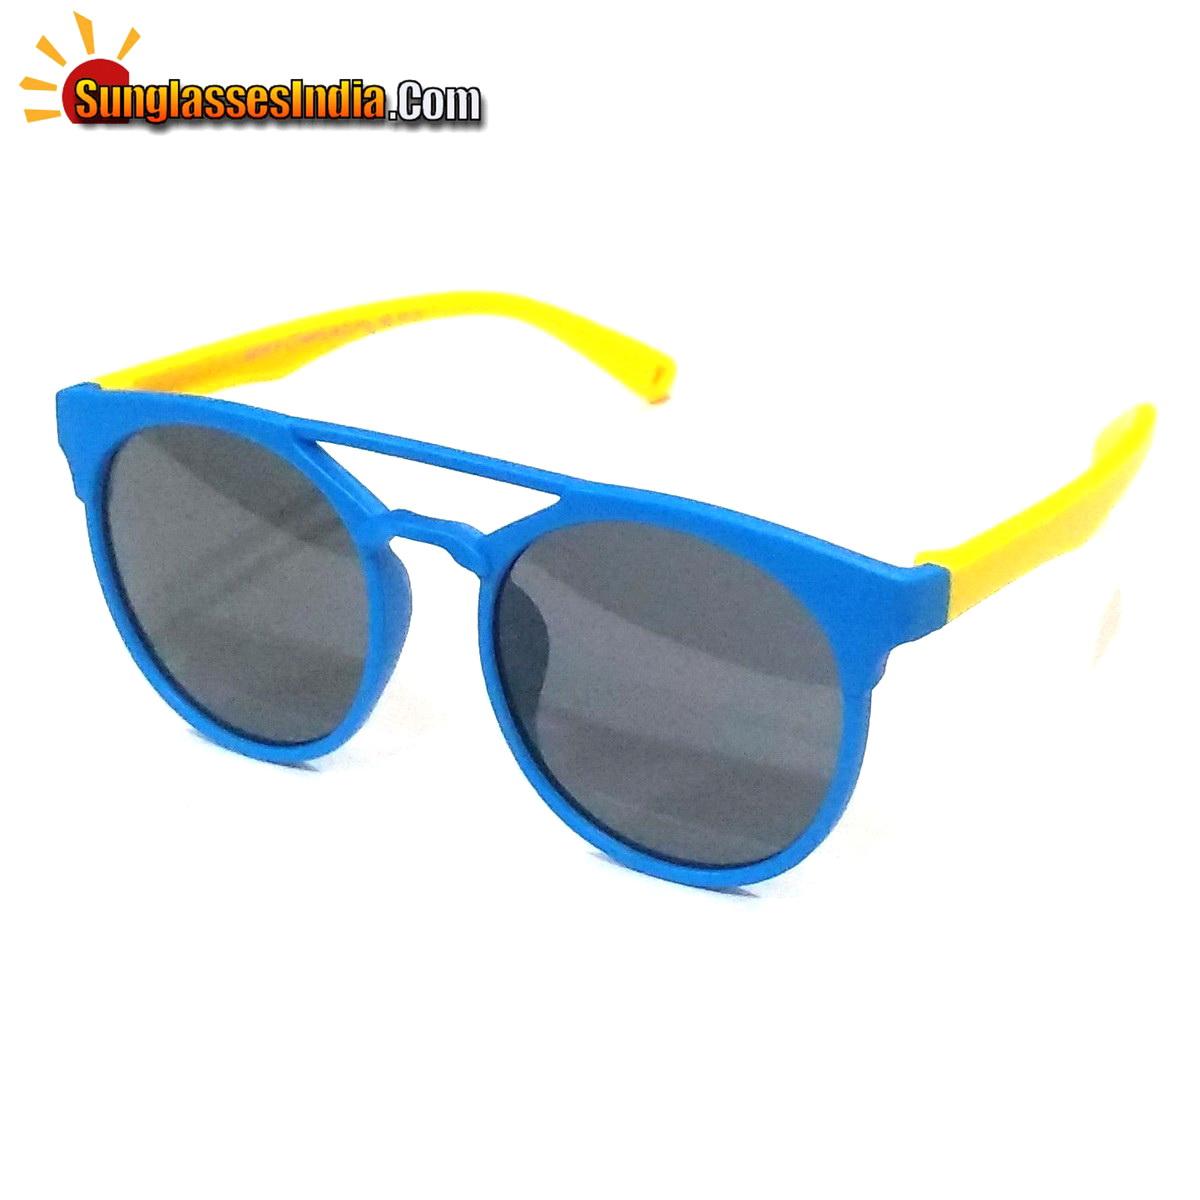 Unbreakable Kids Polarized Sunglasses Light Weight TR Material S8178BlueYellow